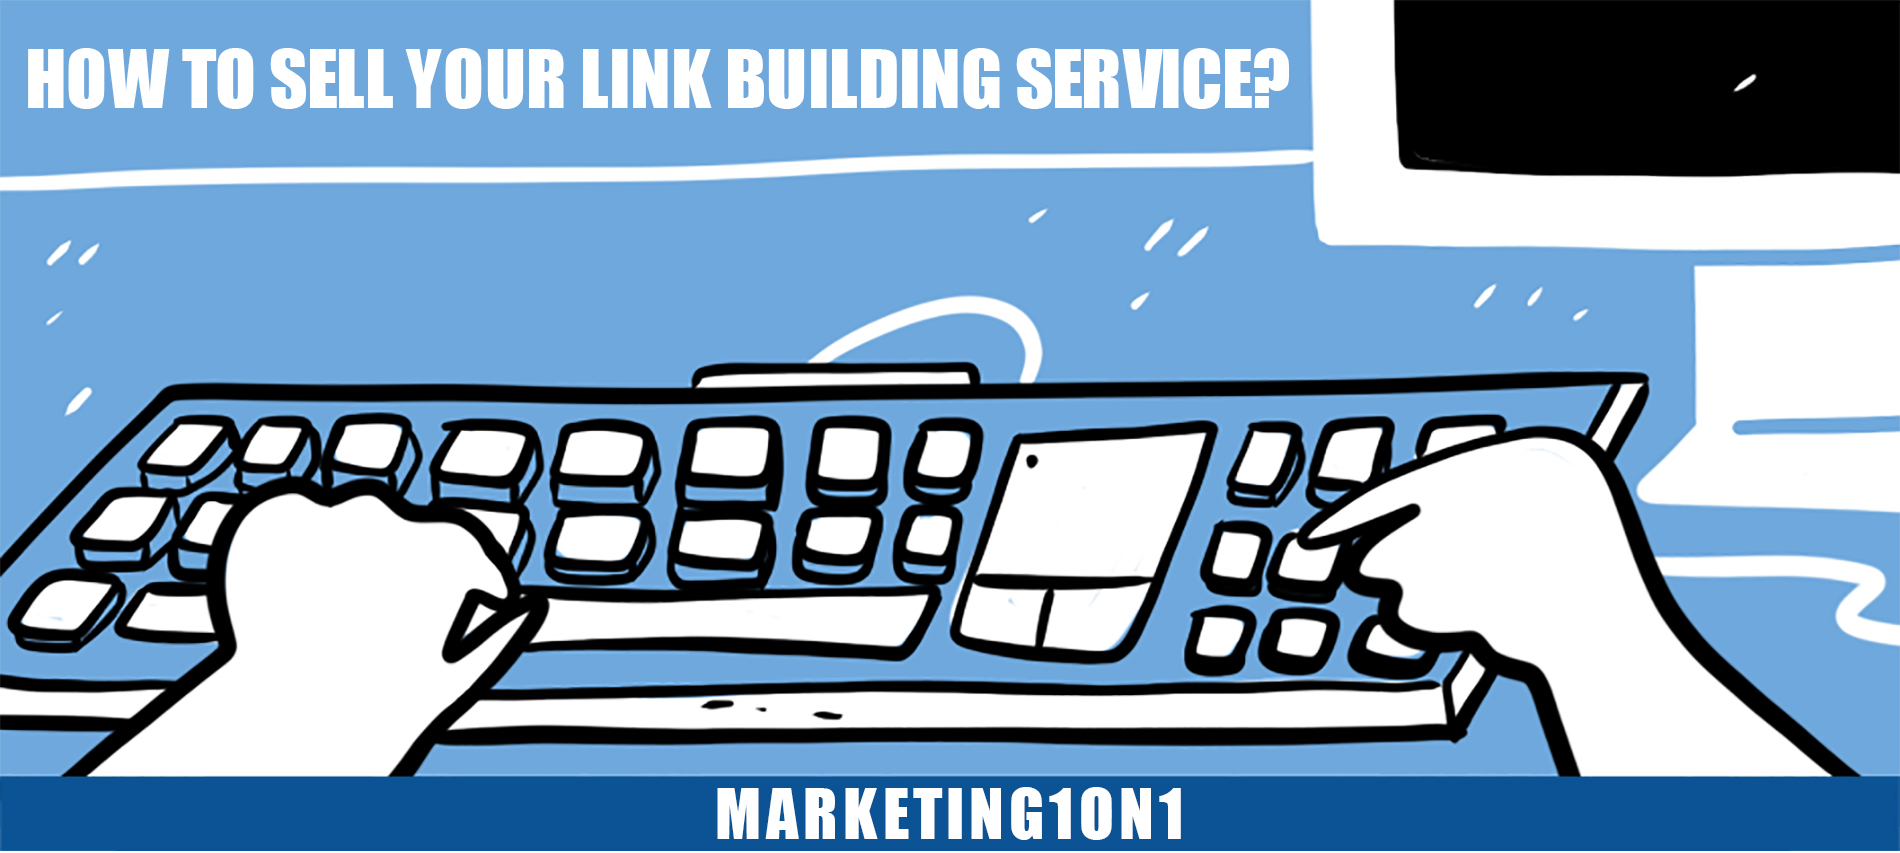 How to sell your link building service?